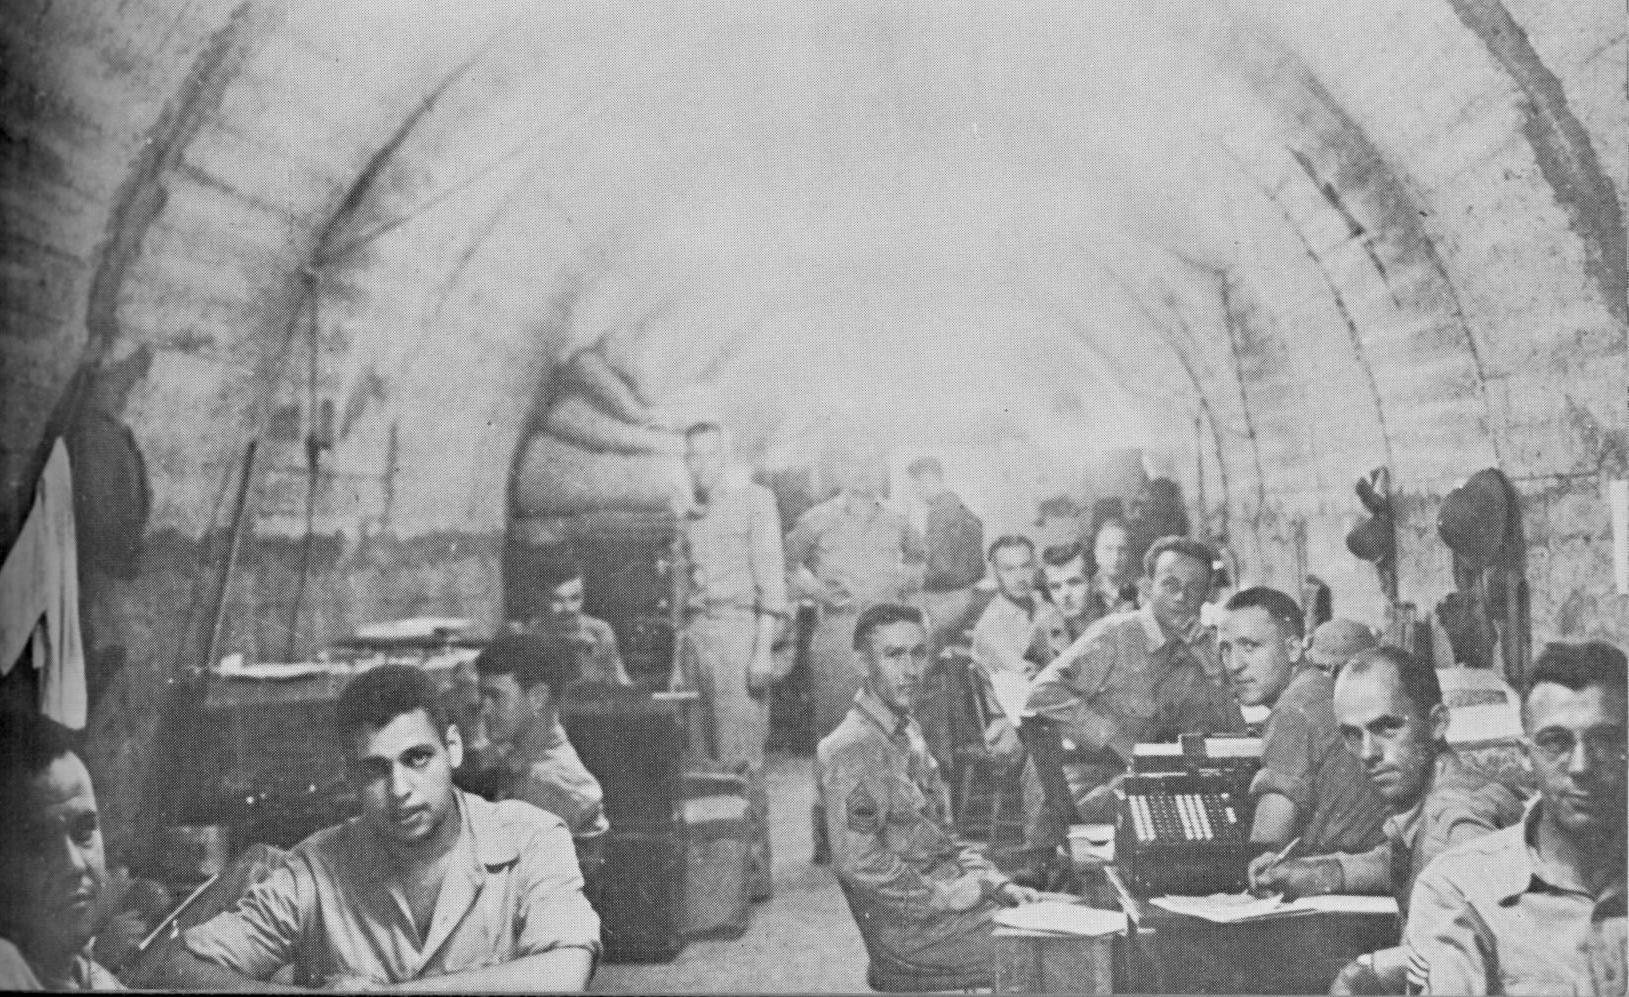 The troops left behind. A candid shot of men in the tunnels of Corregidor photographed on May 3, 1942, and sent out on the last submarine before the May 6 surrender. (U.S. Army photograph)